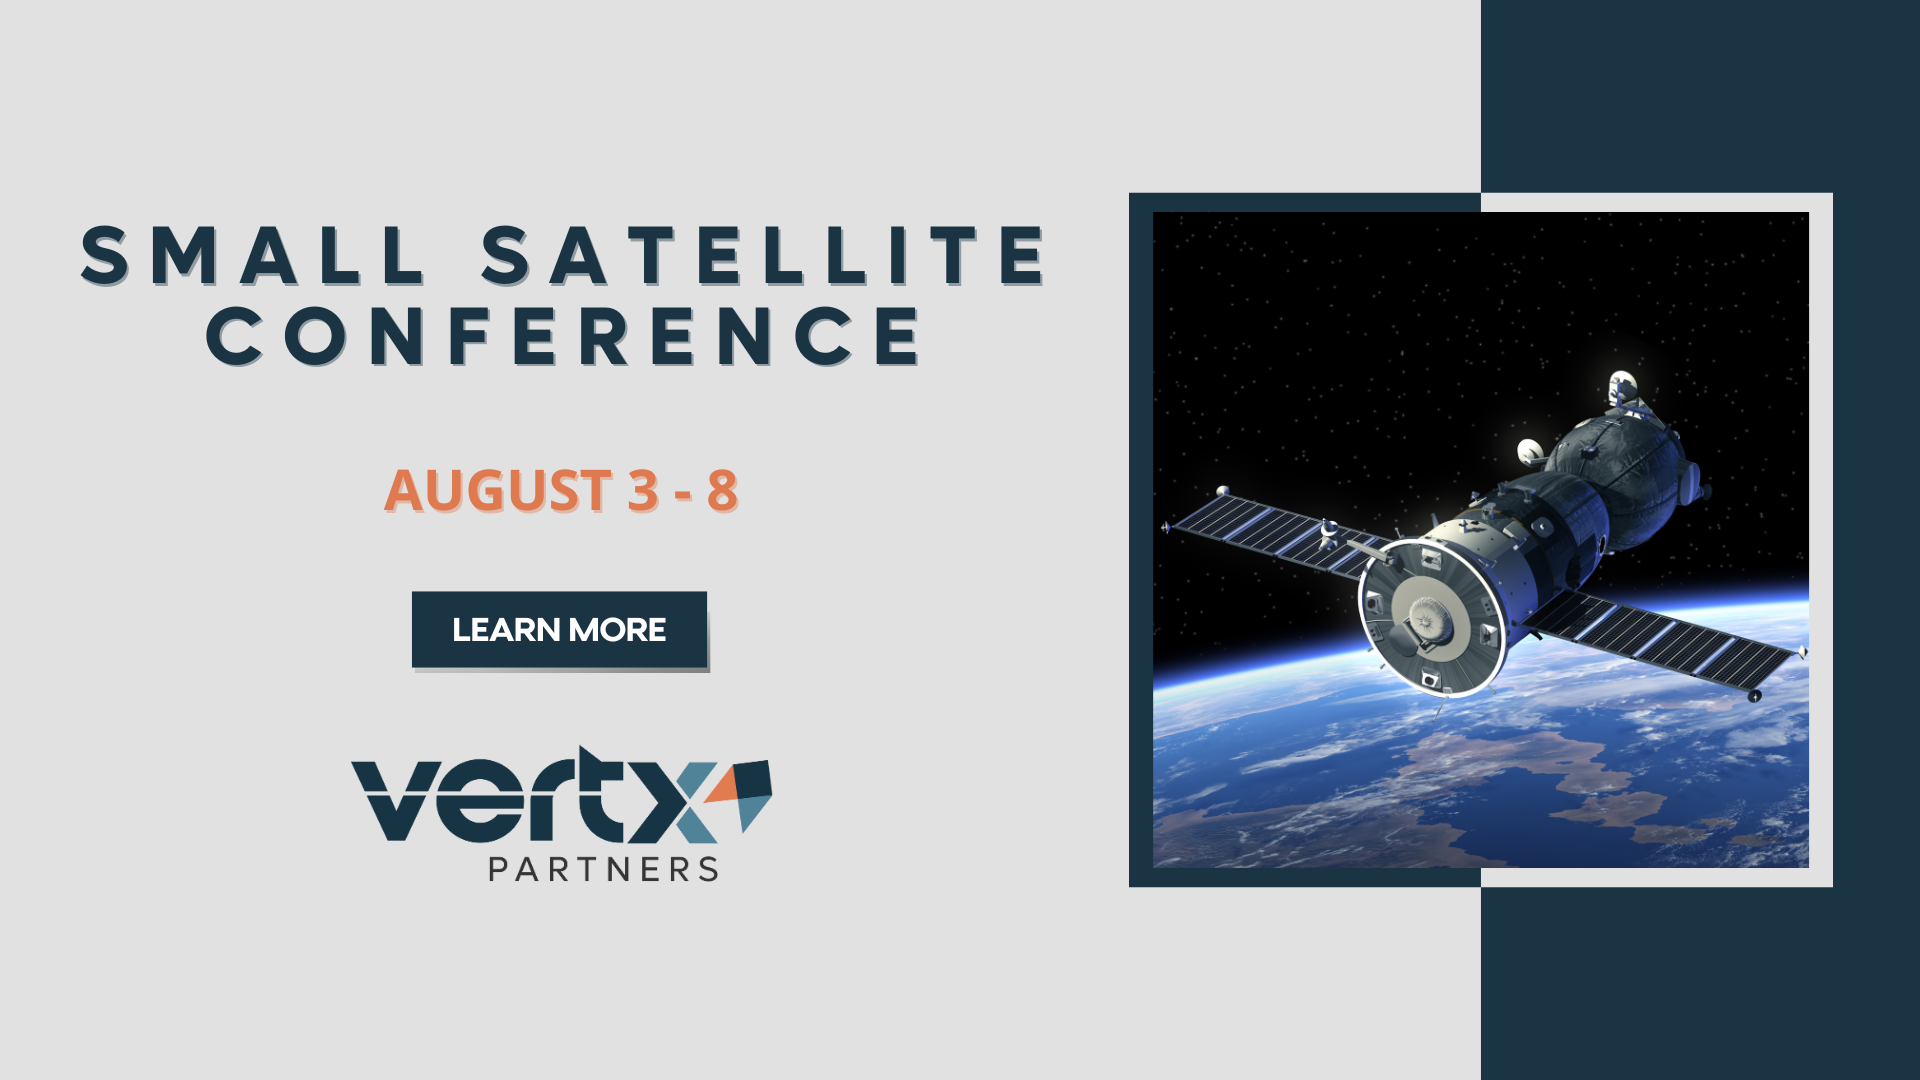 This graphic has the title small satellite conference with the dates august 3 - 8 under it and a photo of a satellite in space with the earth underneath next to the title and date.